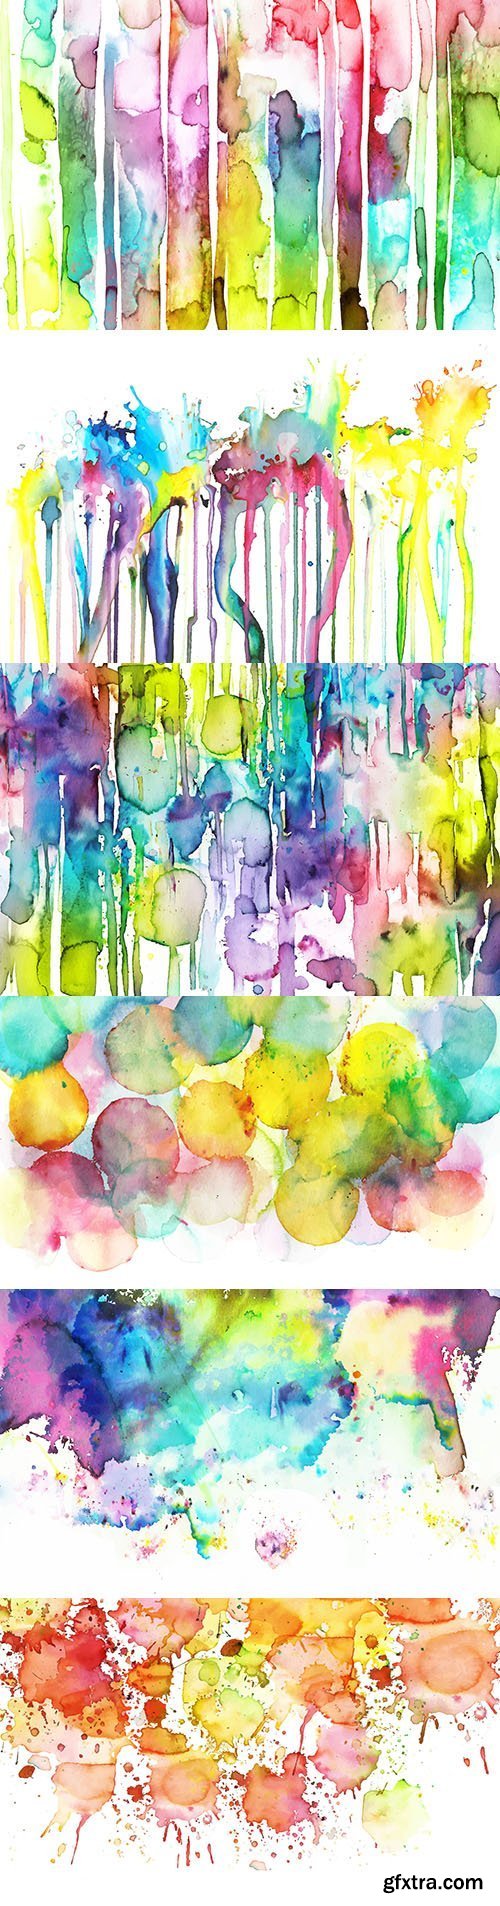 Watercolor splashes bright abstract background